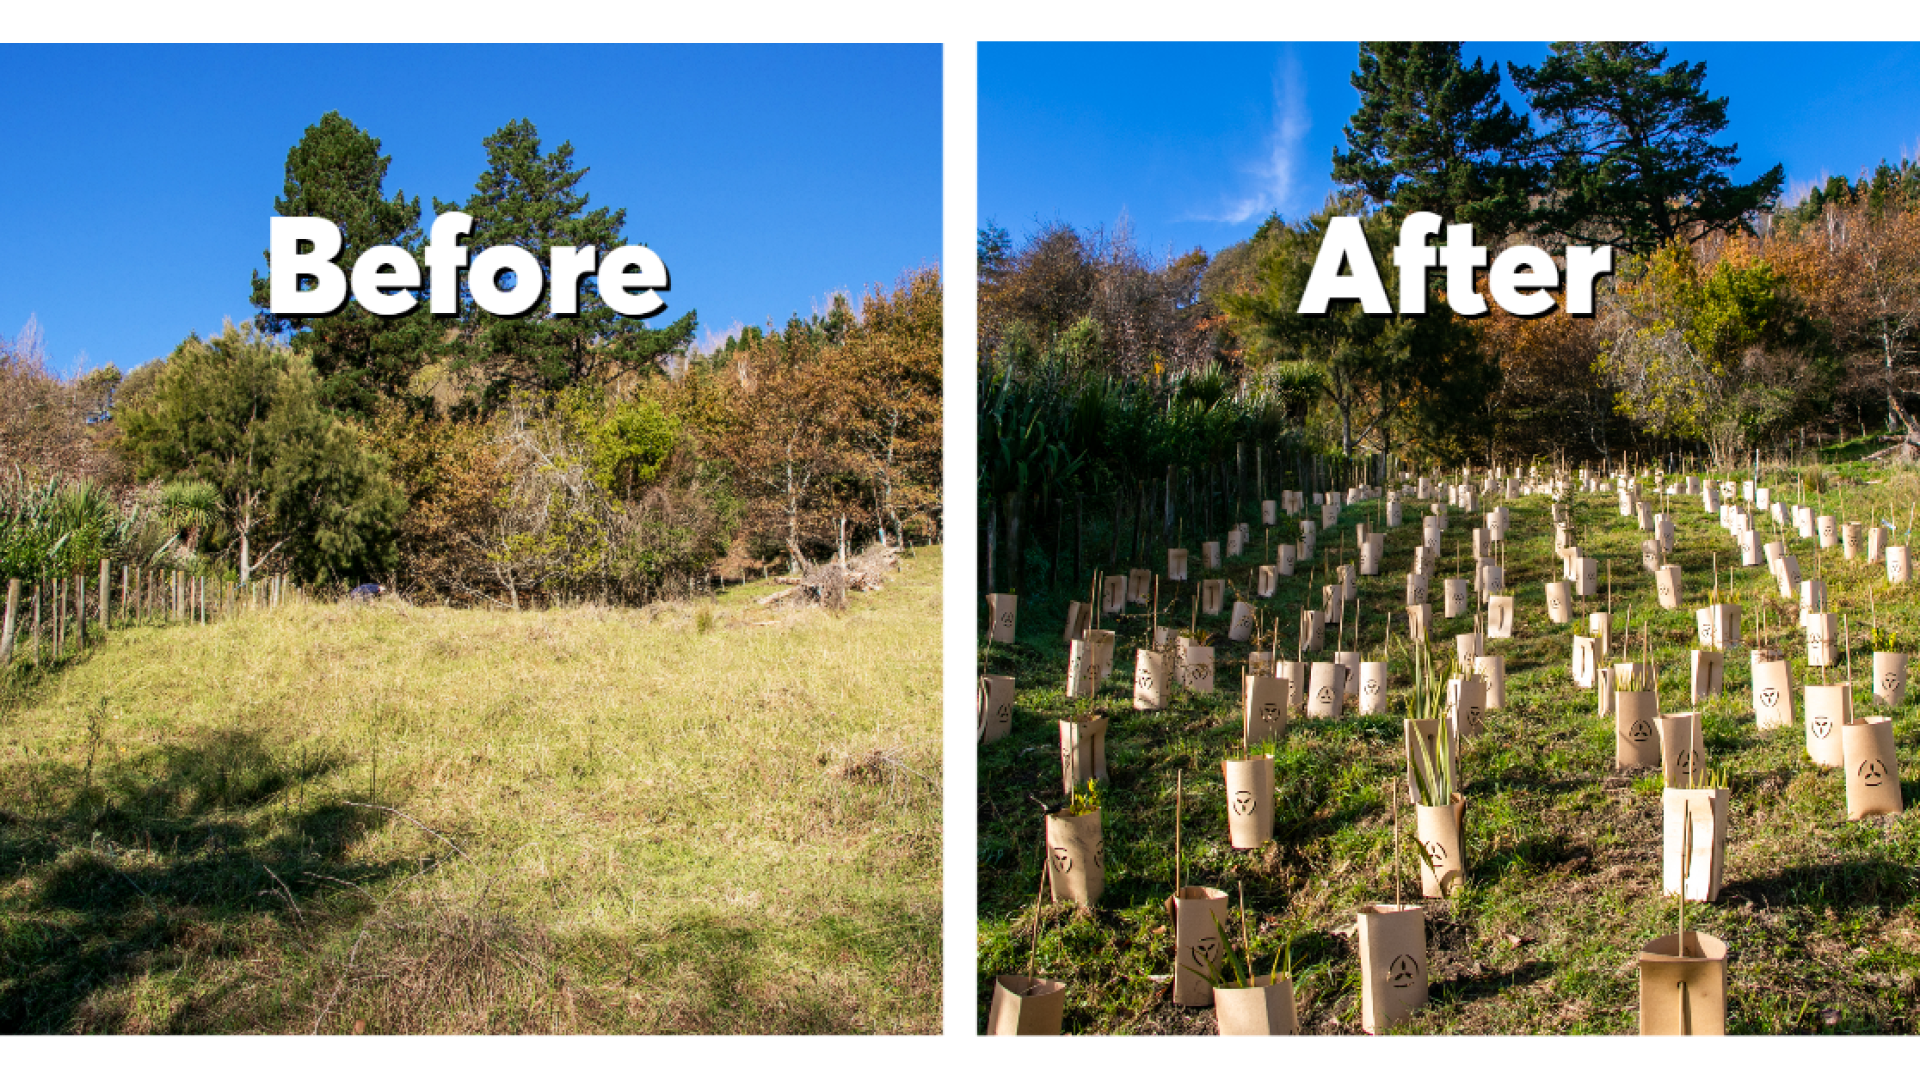 Before and After shots of community planting at the Grampians Reserve.